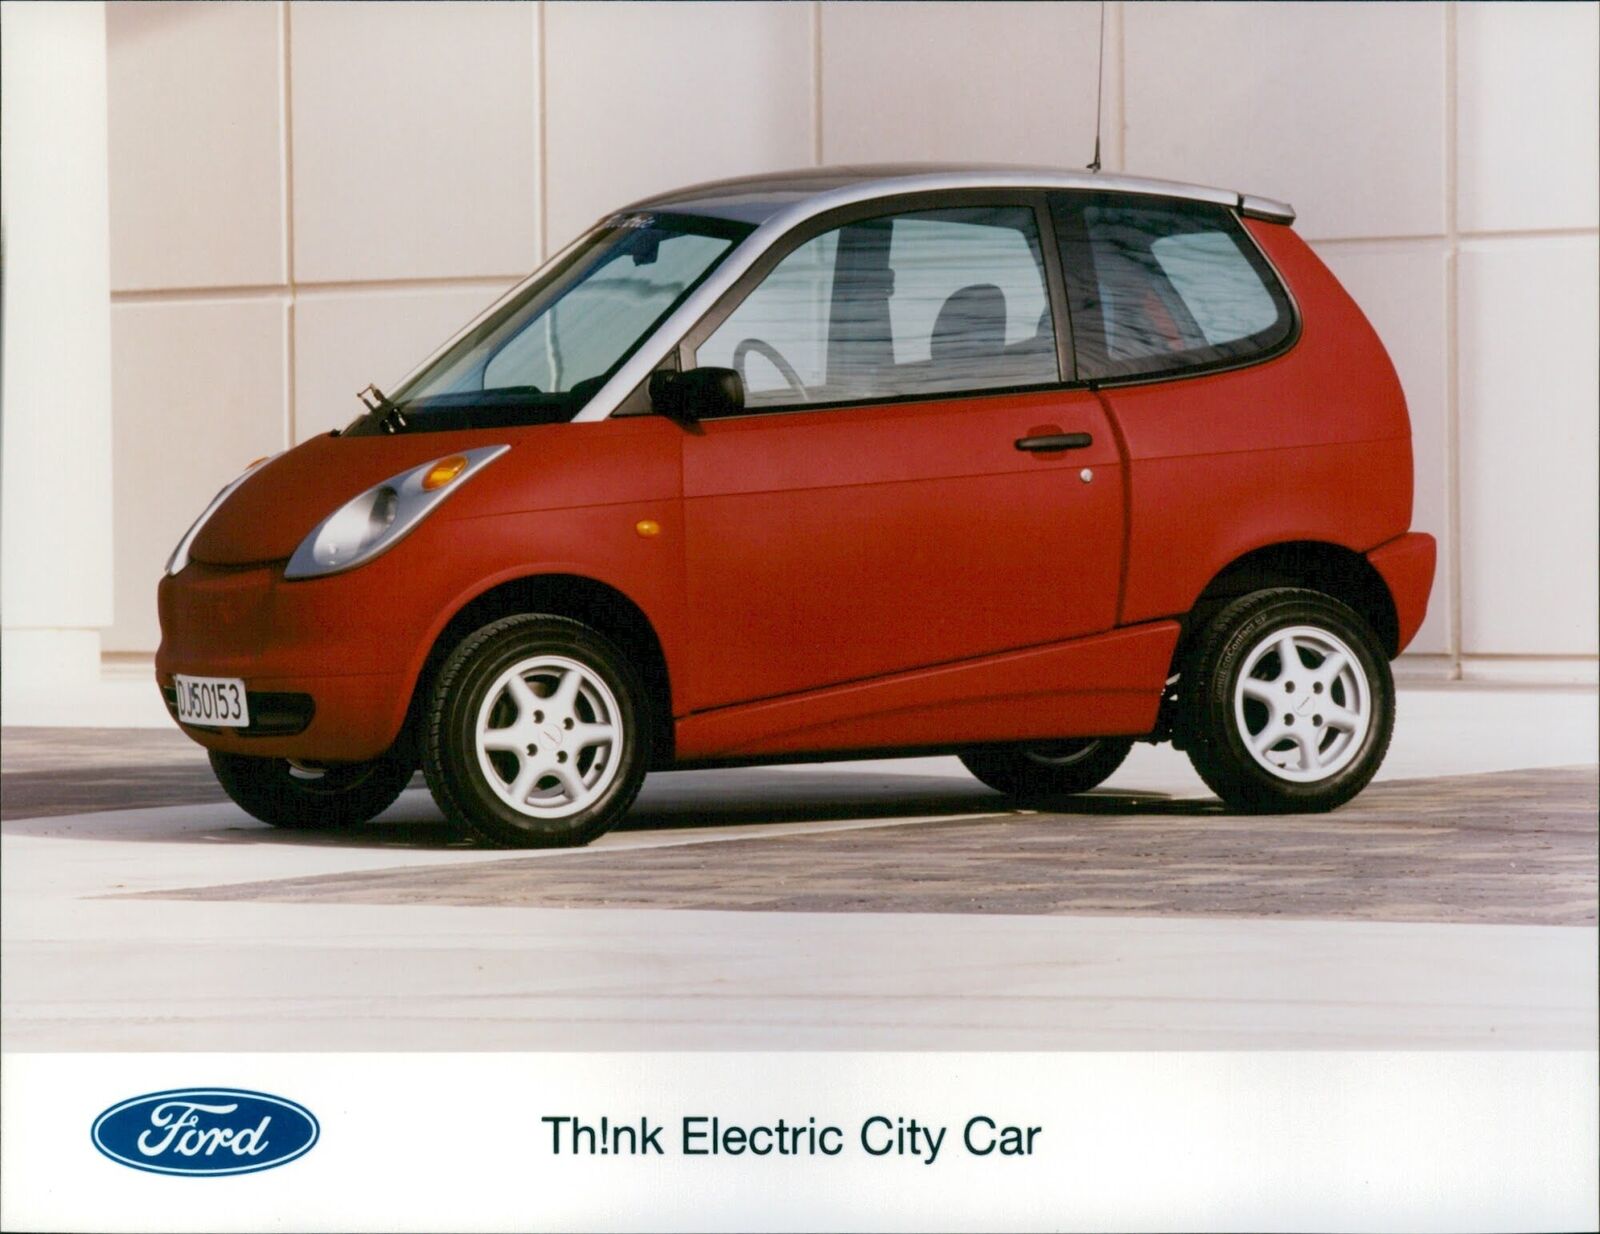 Ford Thnk Electric City Car - Vintage Photograph 3454414